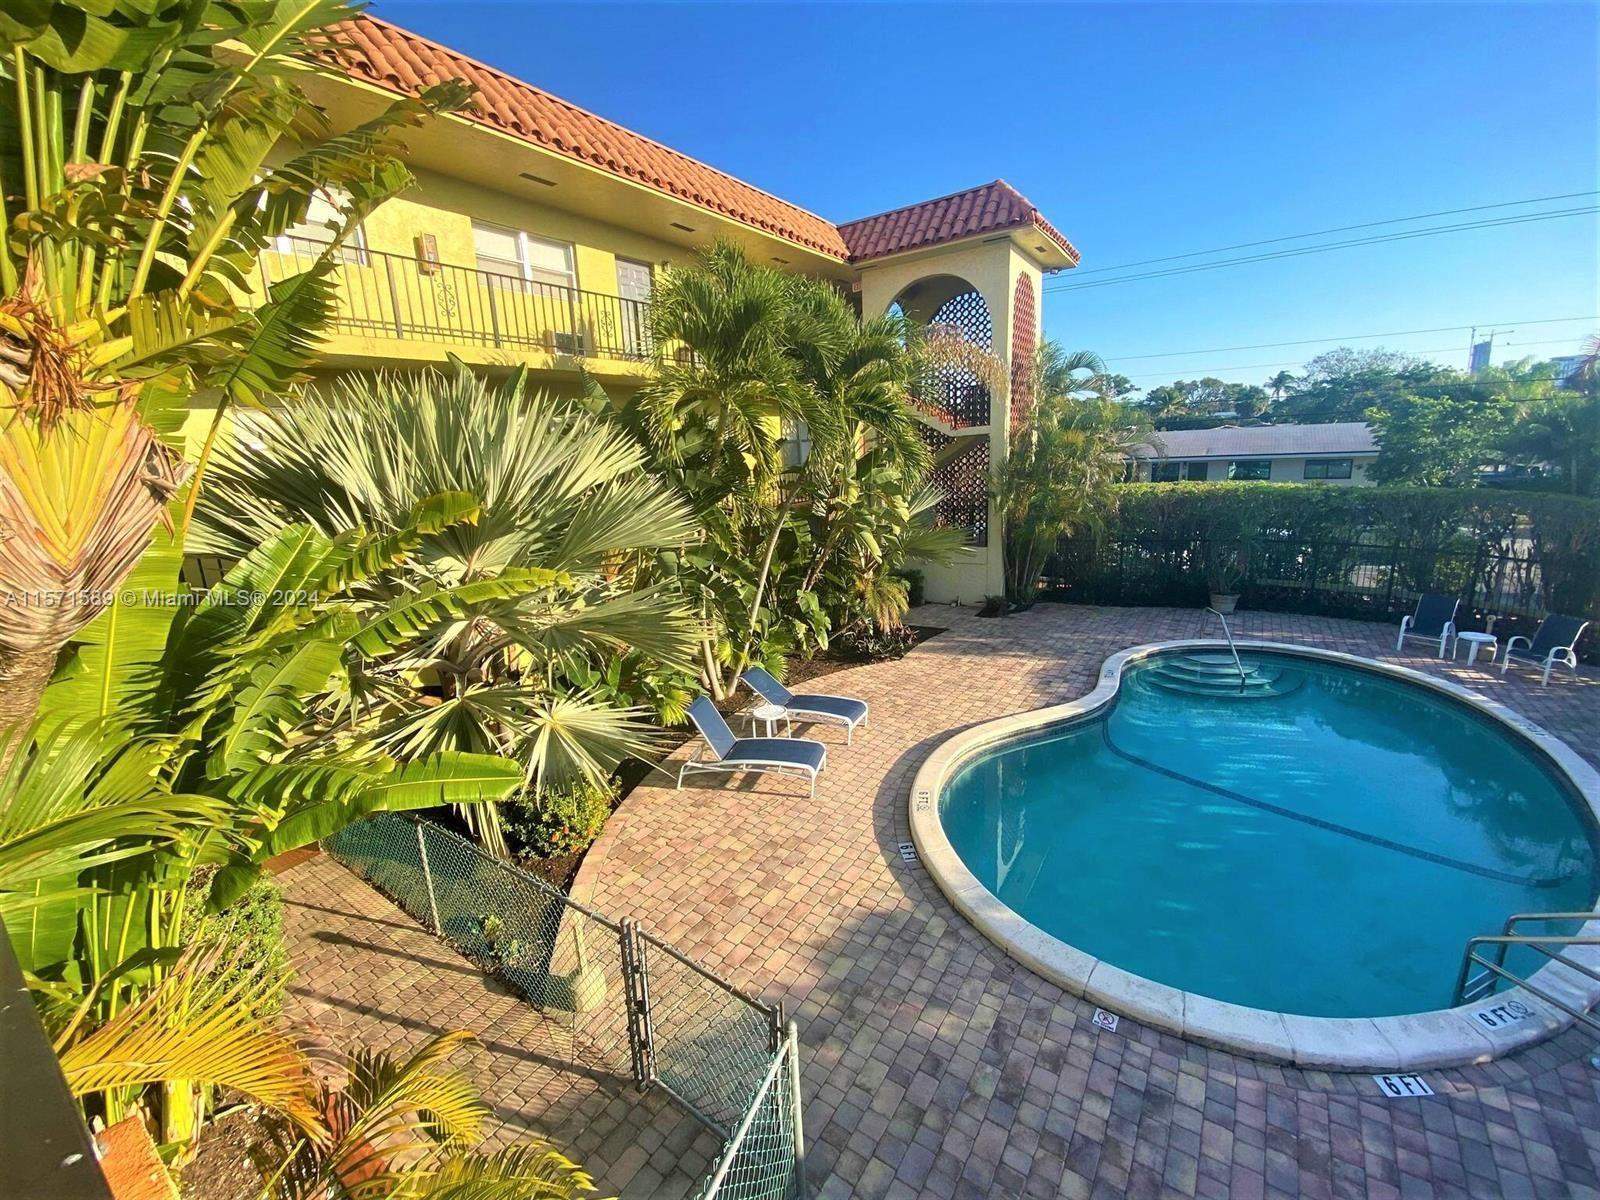 Photo of 1100 NE 9th Ave #307 in Fort Lauderdale, FL